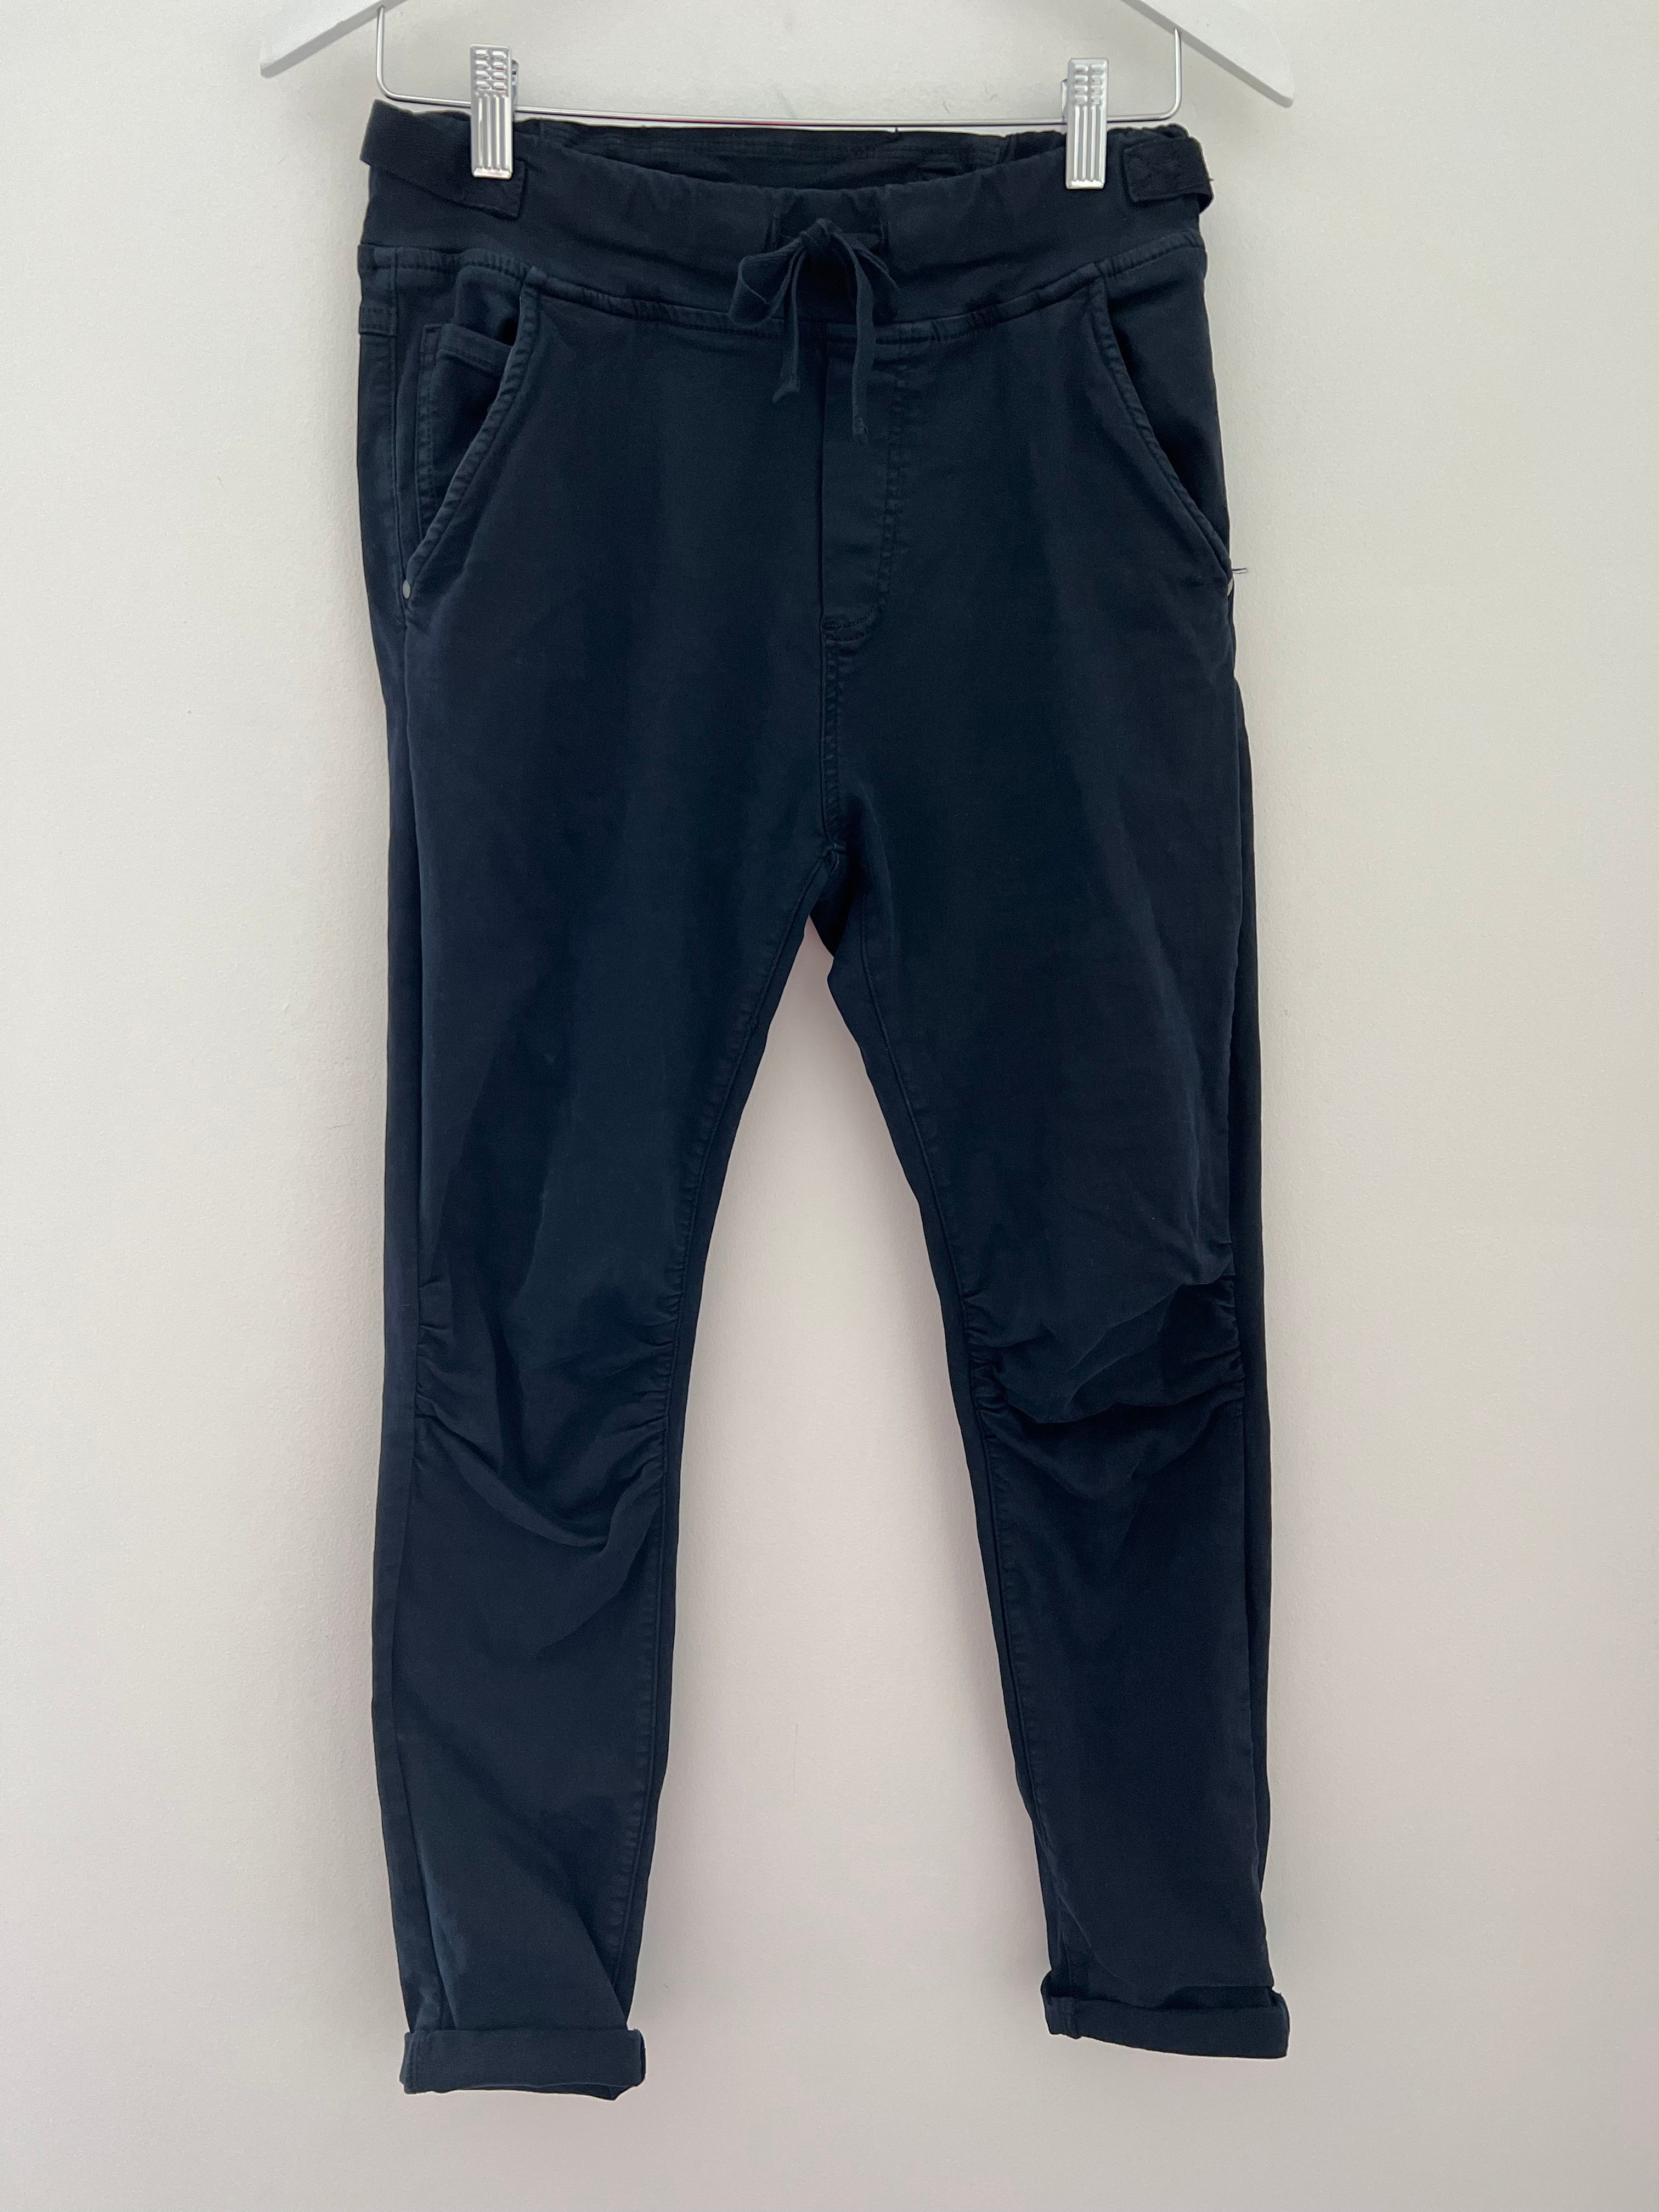 Ink Jean Joggers